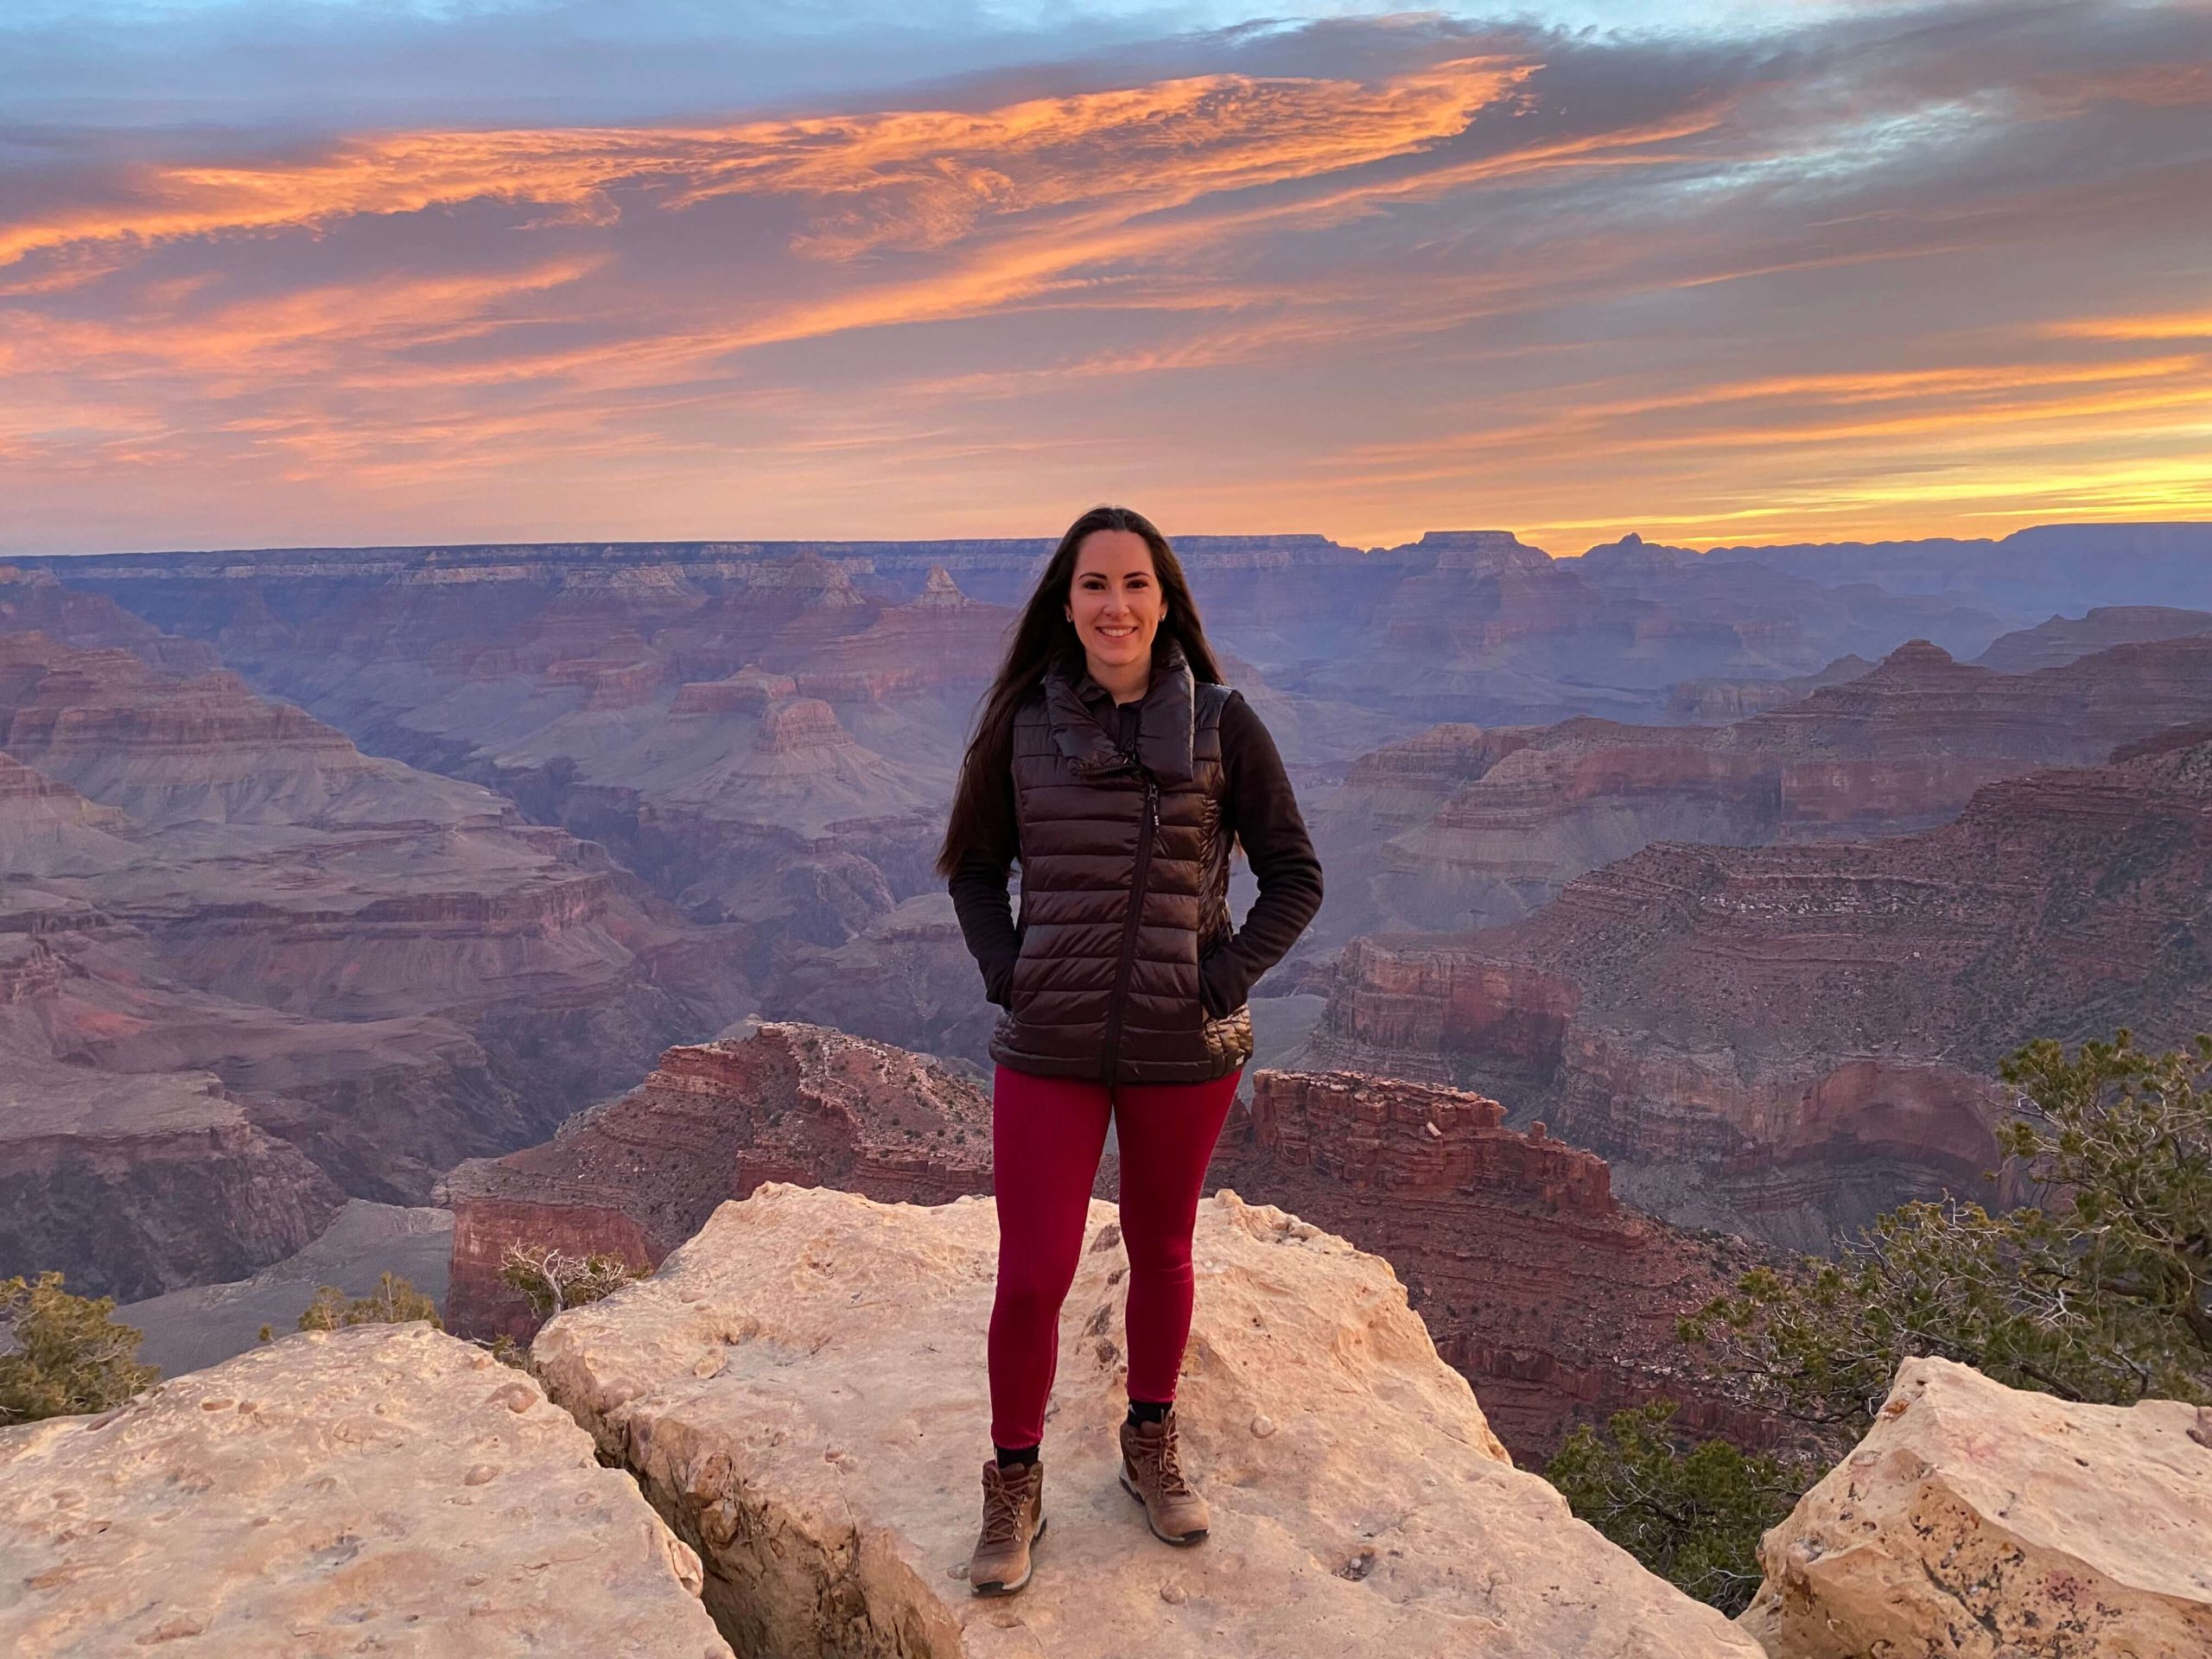 EXPLORING THE SOUTH RIM OF THE GRAND CANYON